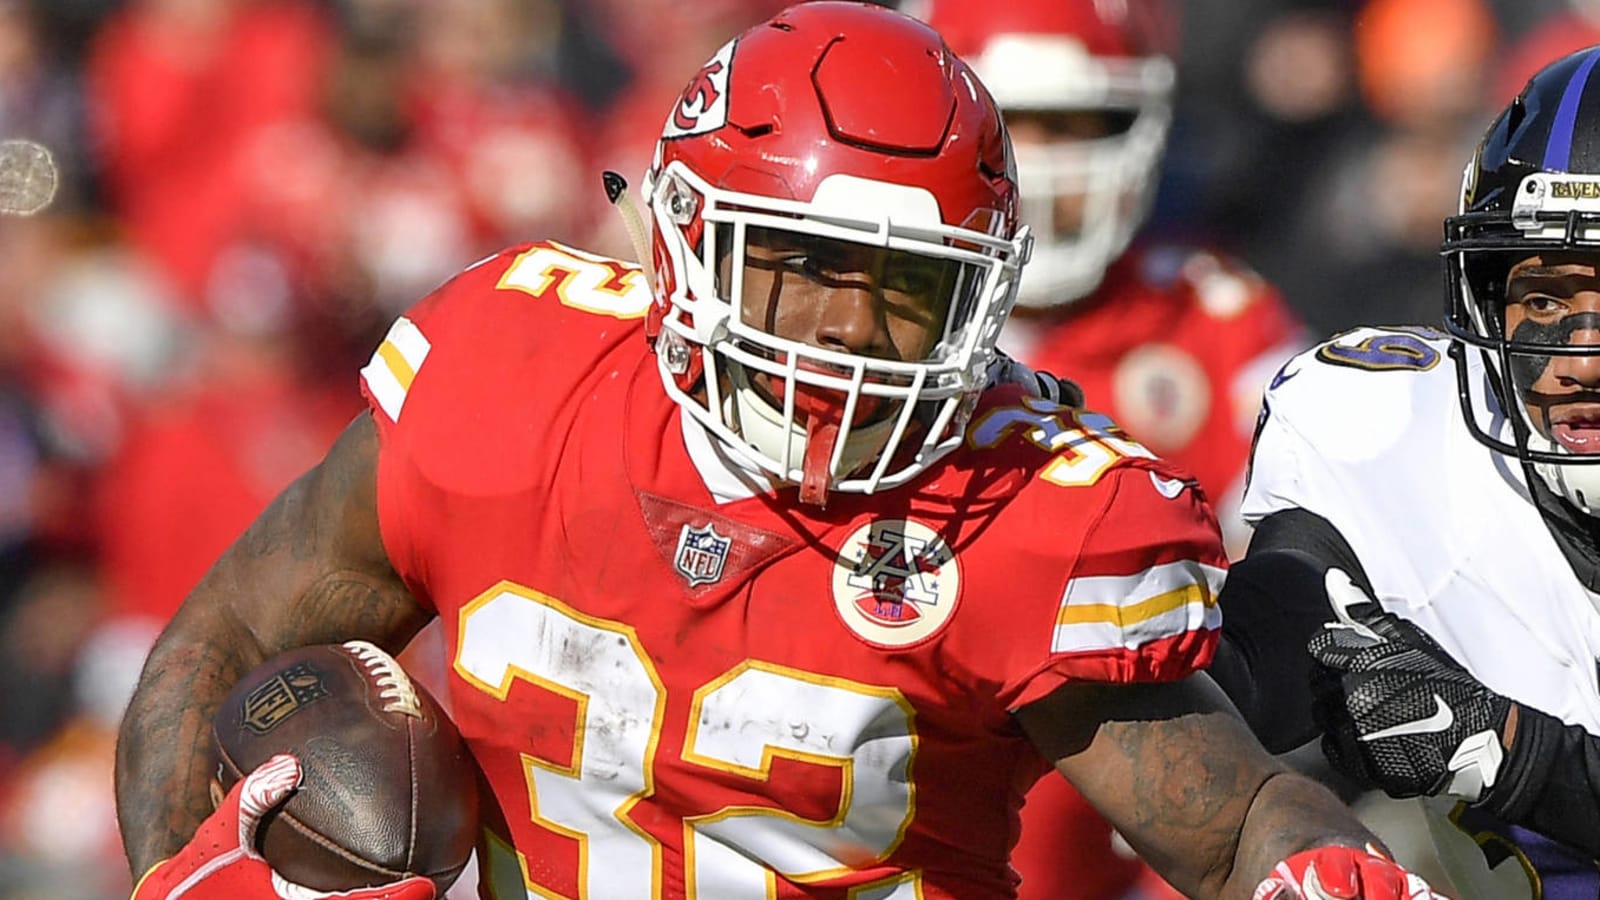 Raiders host Spencer Ware for workout